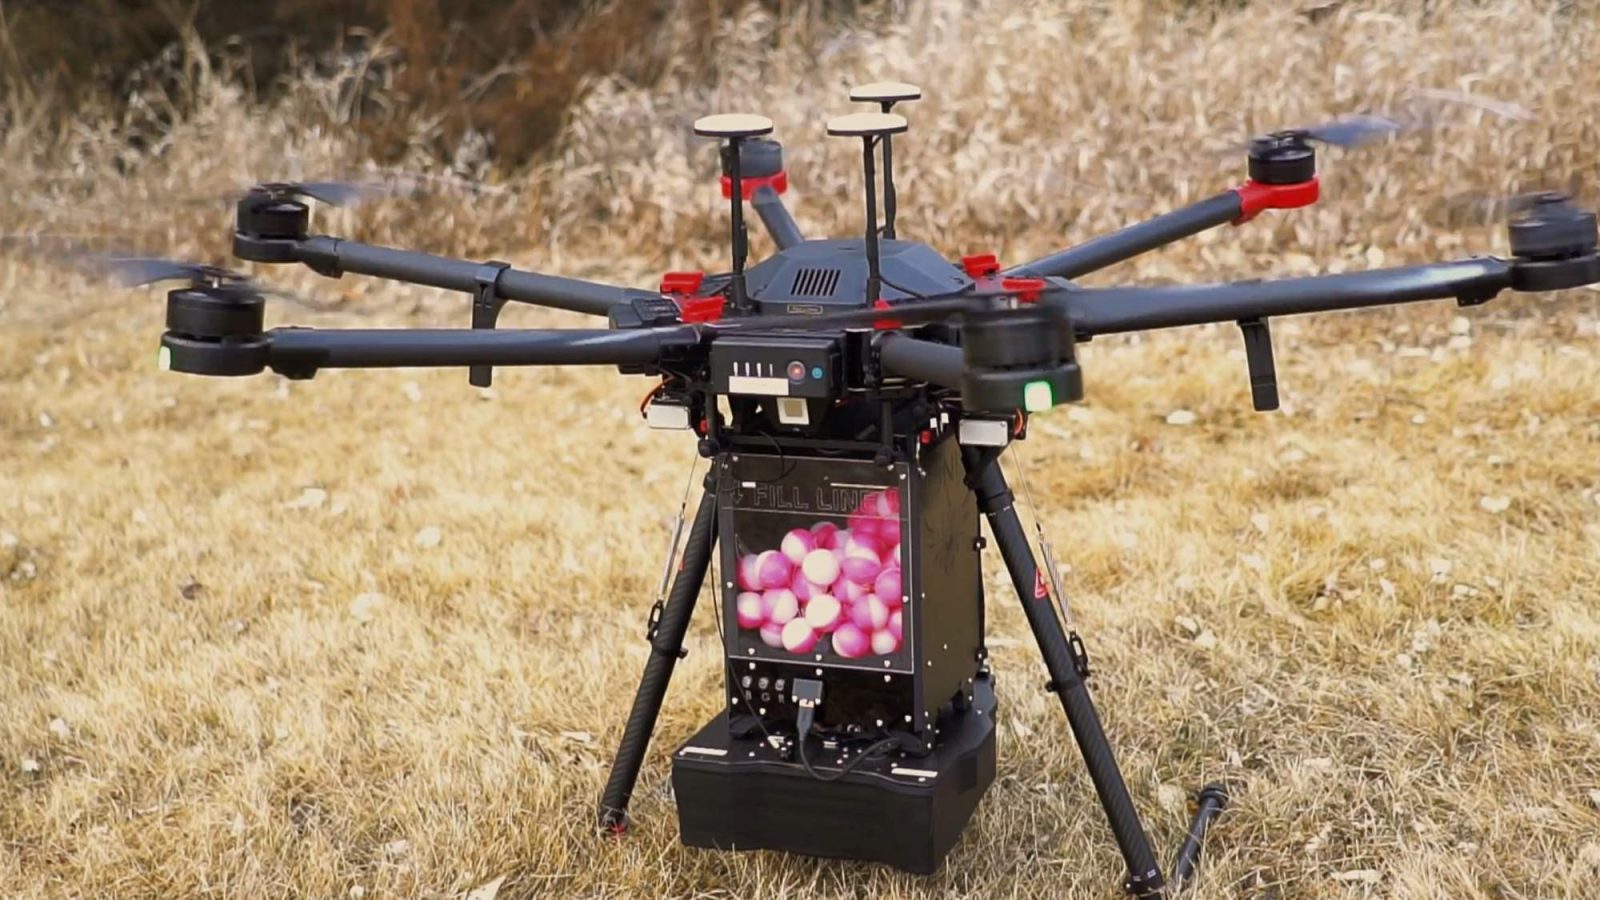 Self-igniting eggs dropped by ‘dragon’ drones can help save lives